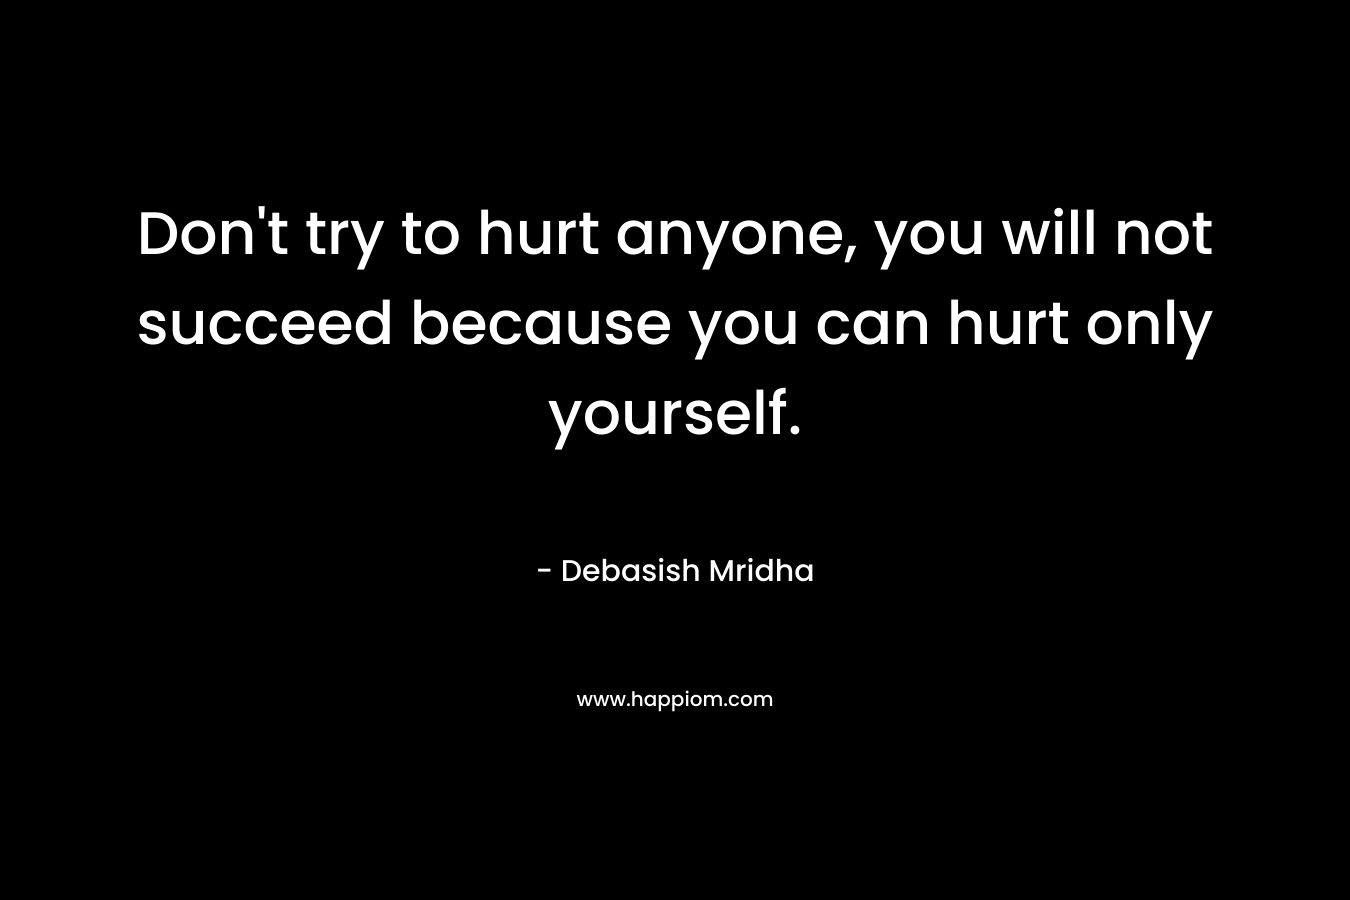 Don't try to hurt anyone, you will not succeed because you can hurt only yourself.